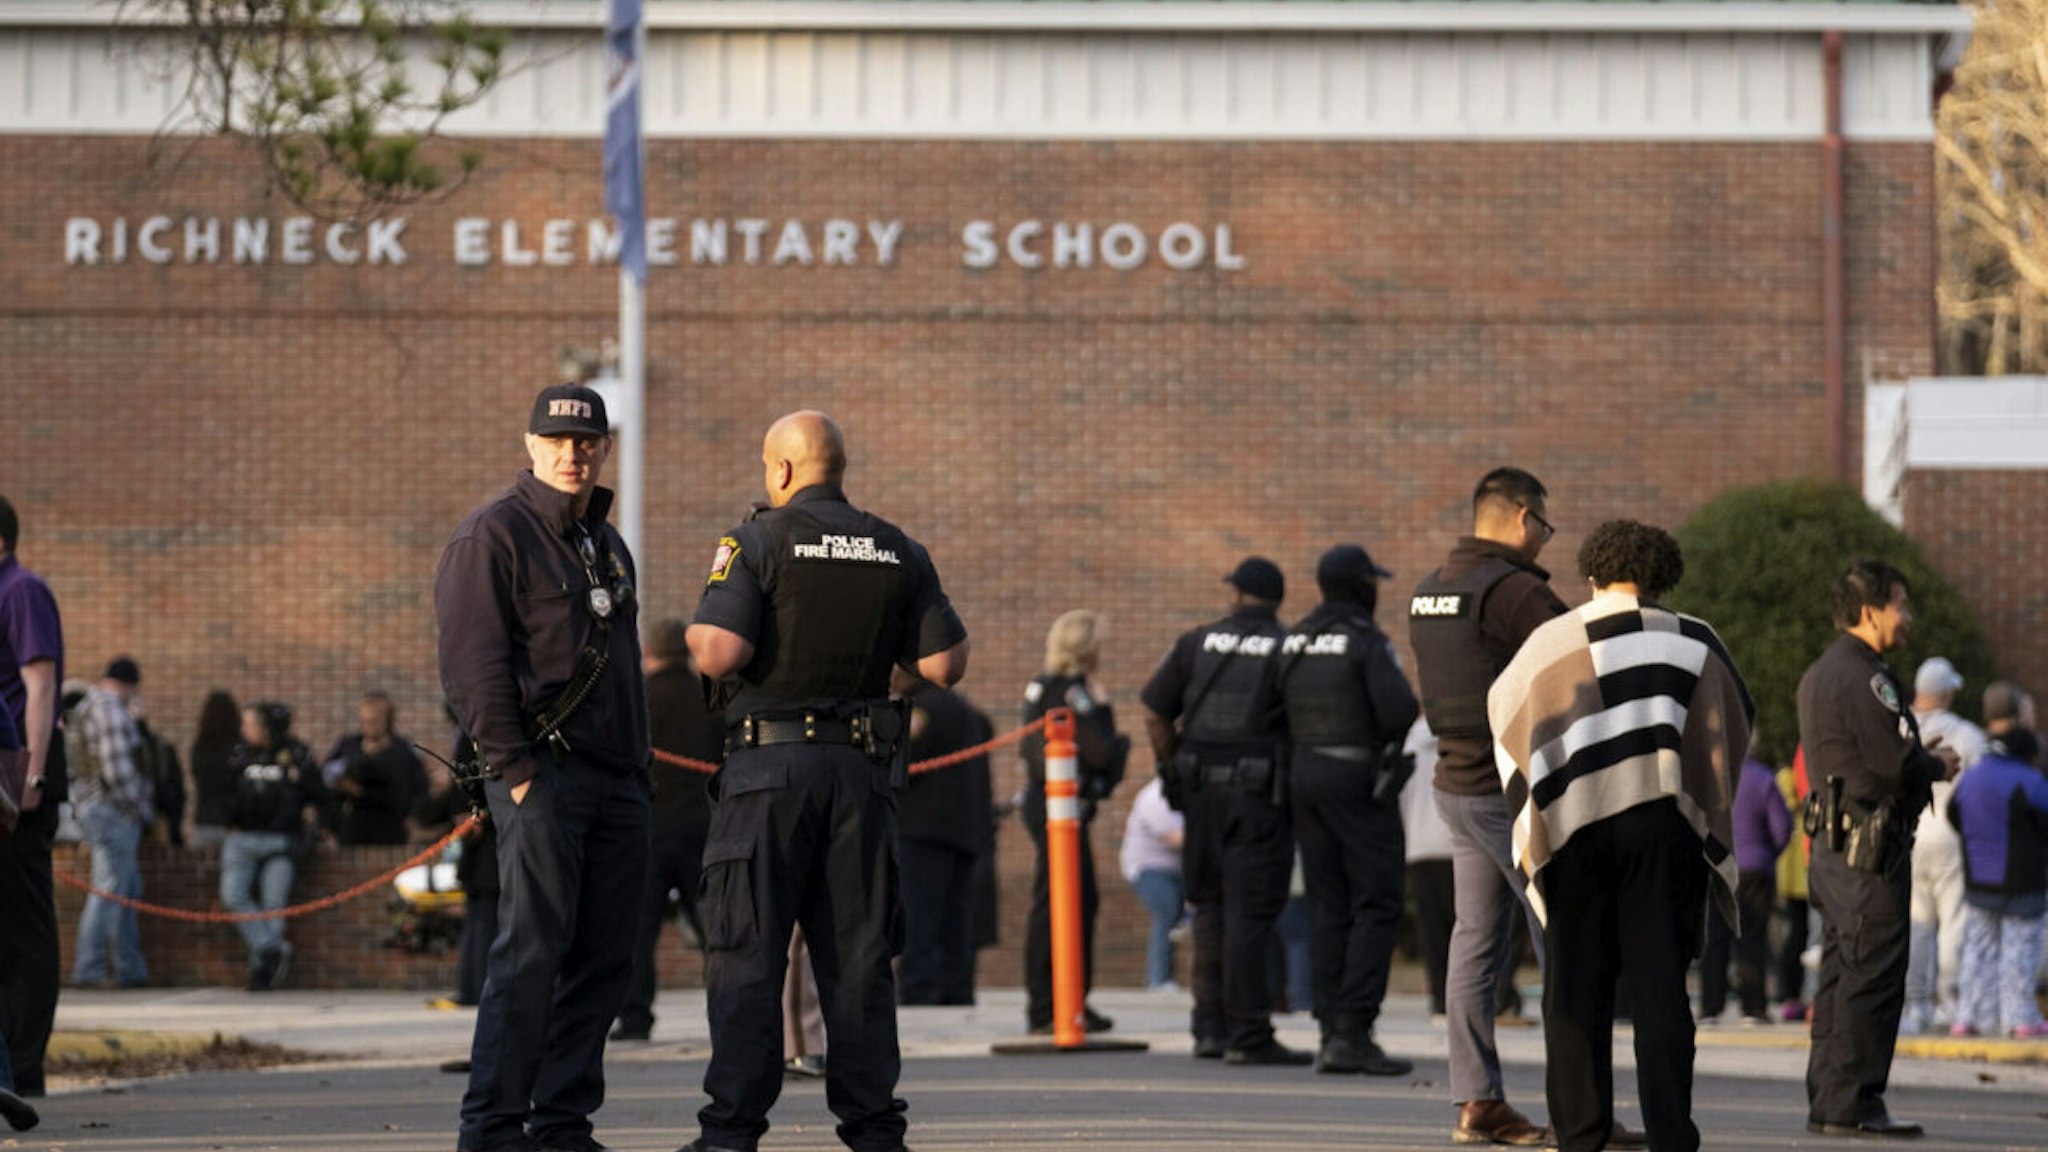 Police respond to a shooting that injured a teacher at Richneck Elementary in Newport News, Virginia, on Jan. 6, 2023